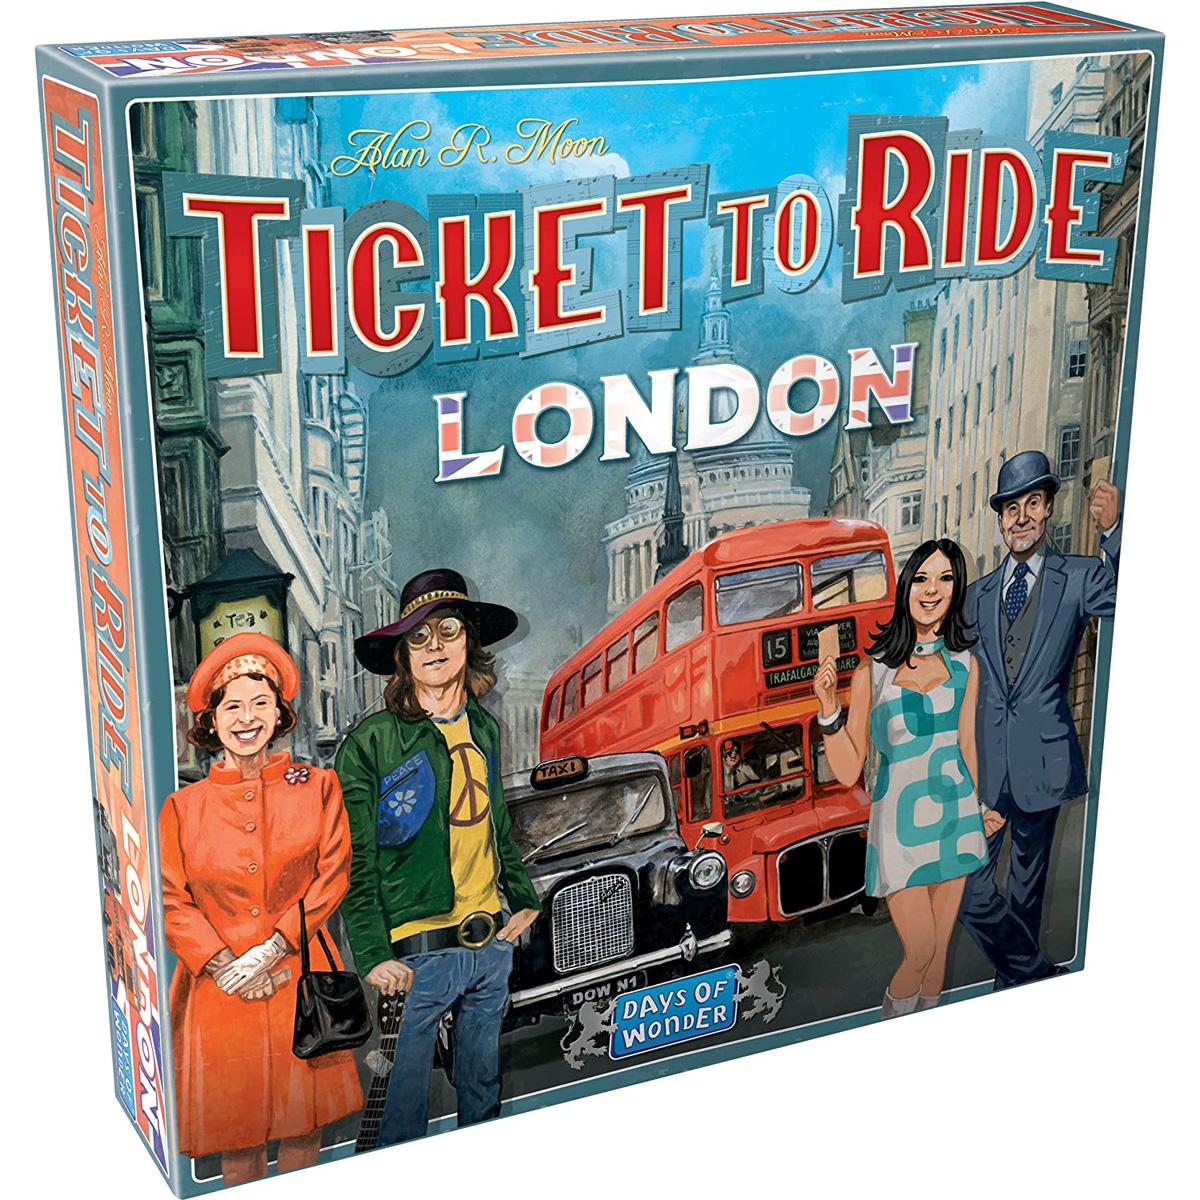 Ticket to Ride London Board Game for $8.99